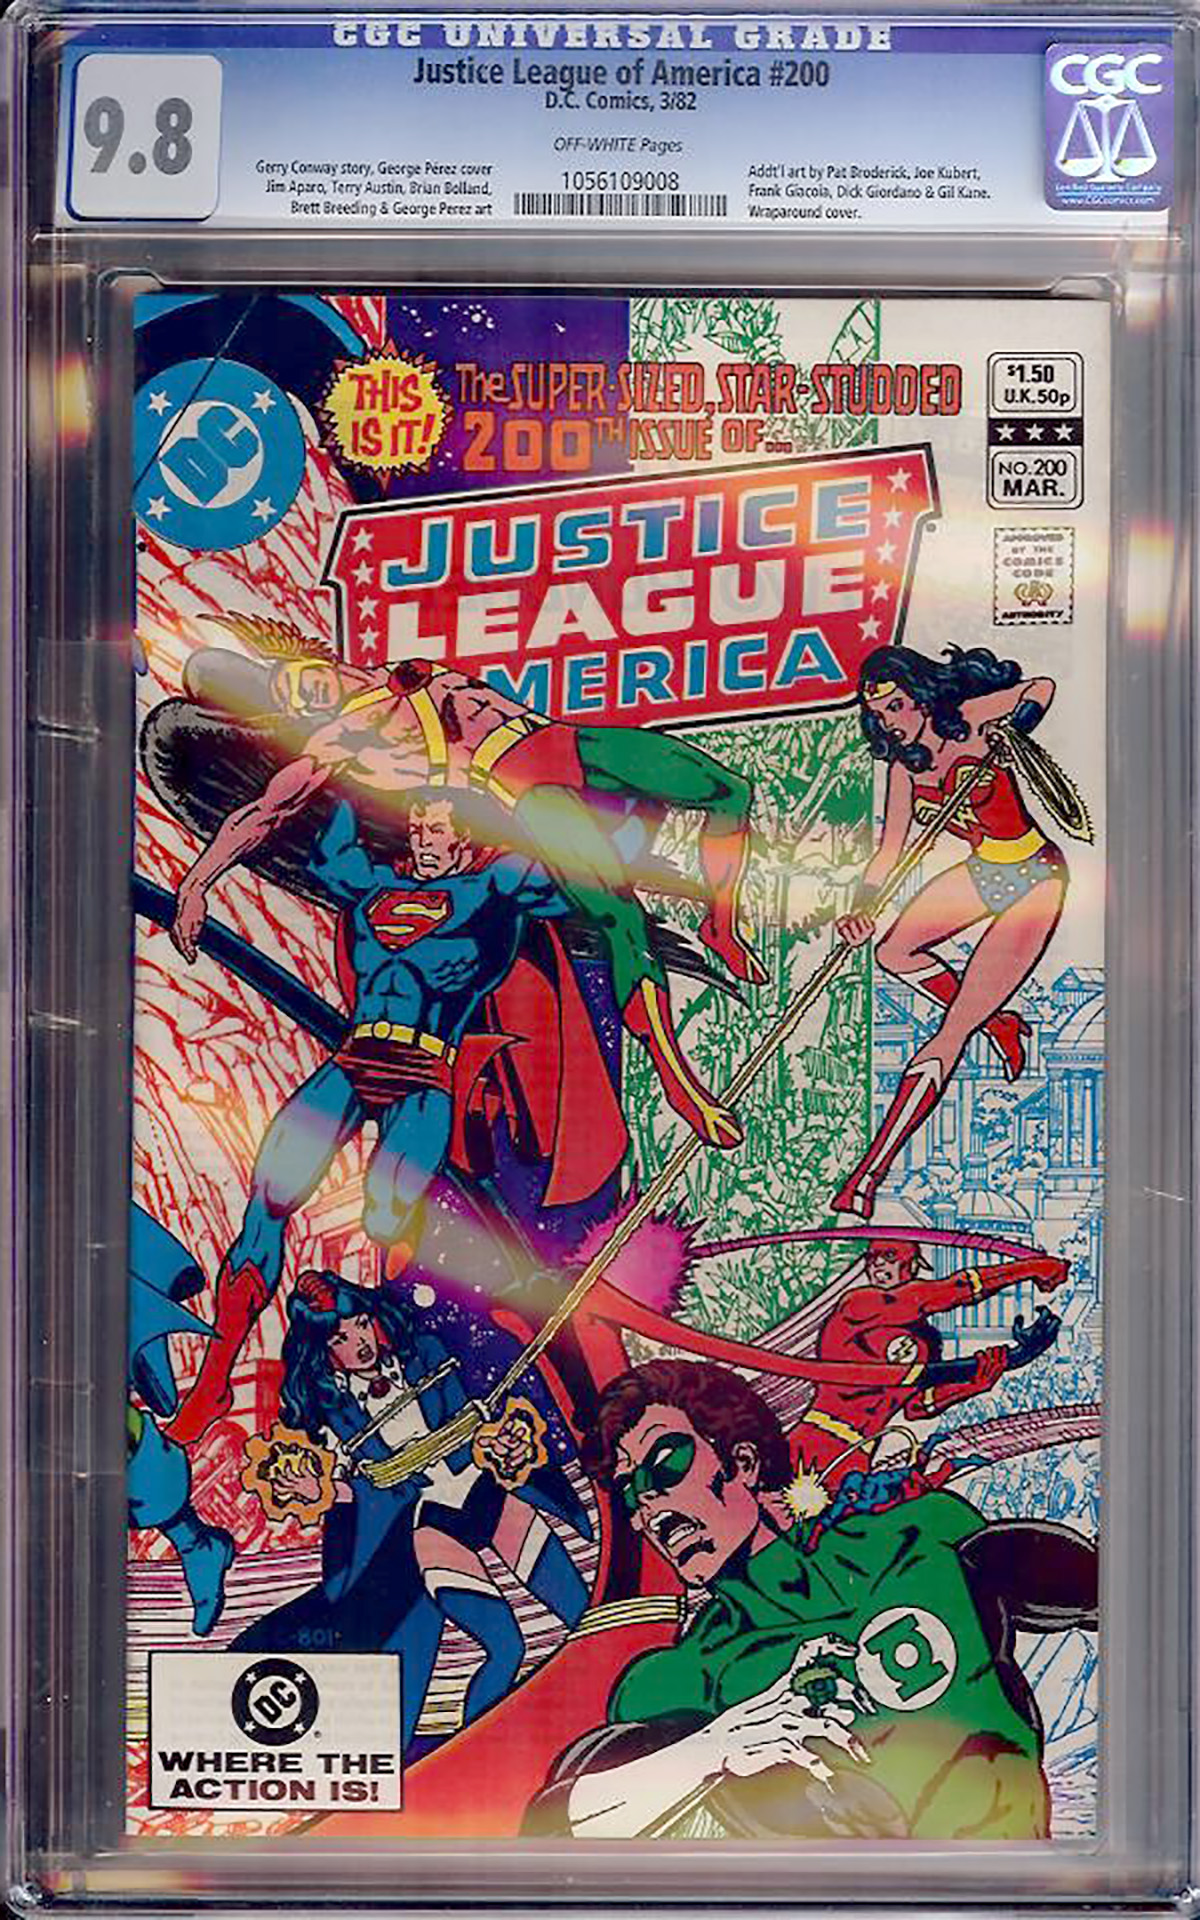 Justice League of America #200 CGC 9.8 ow